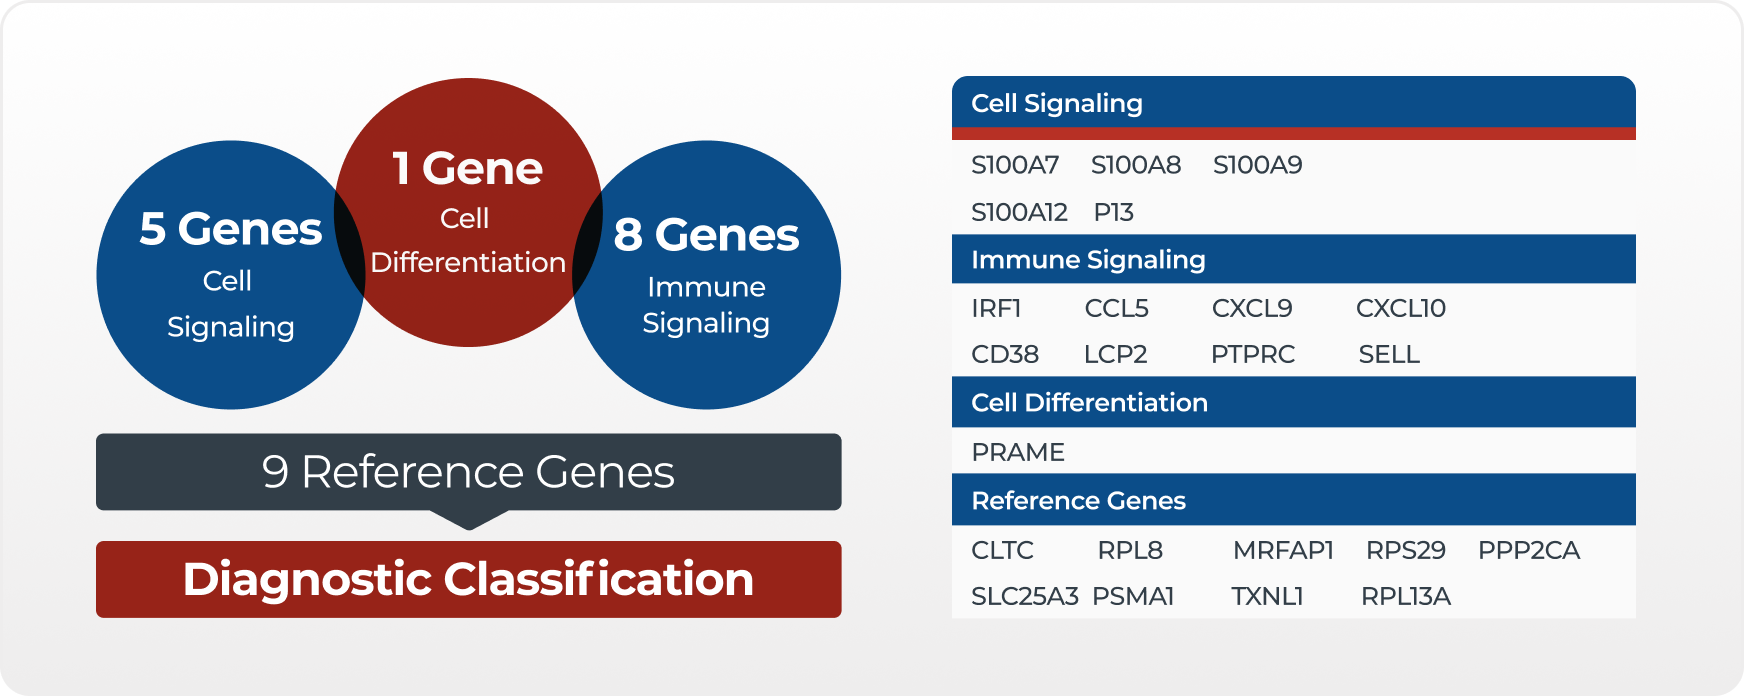 5 genes involved in cell signaling, 1 gene involved in cell differentiation, and 8 genes involved in immune signaling